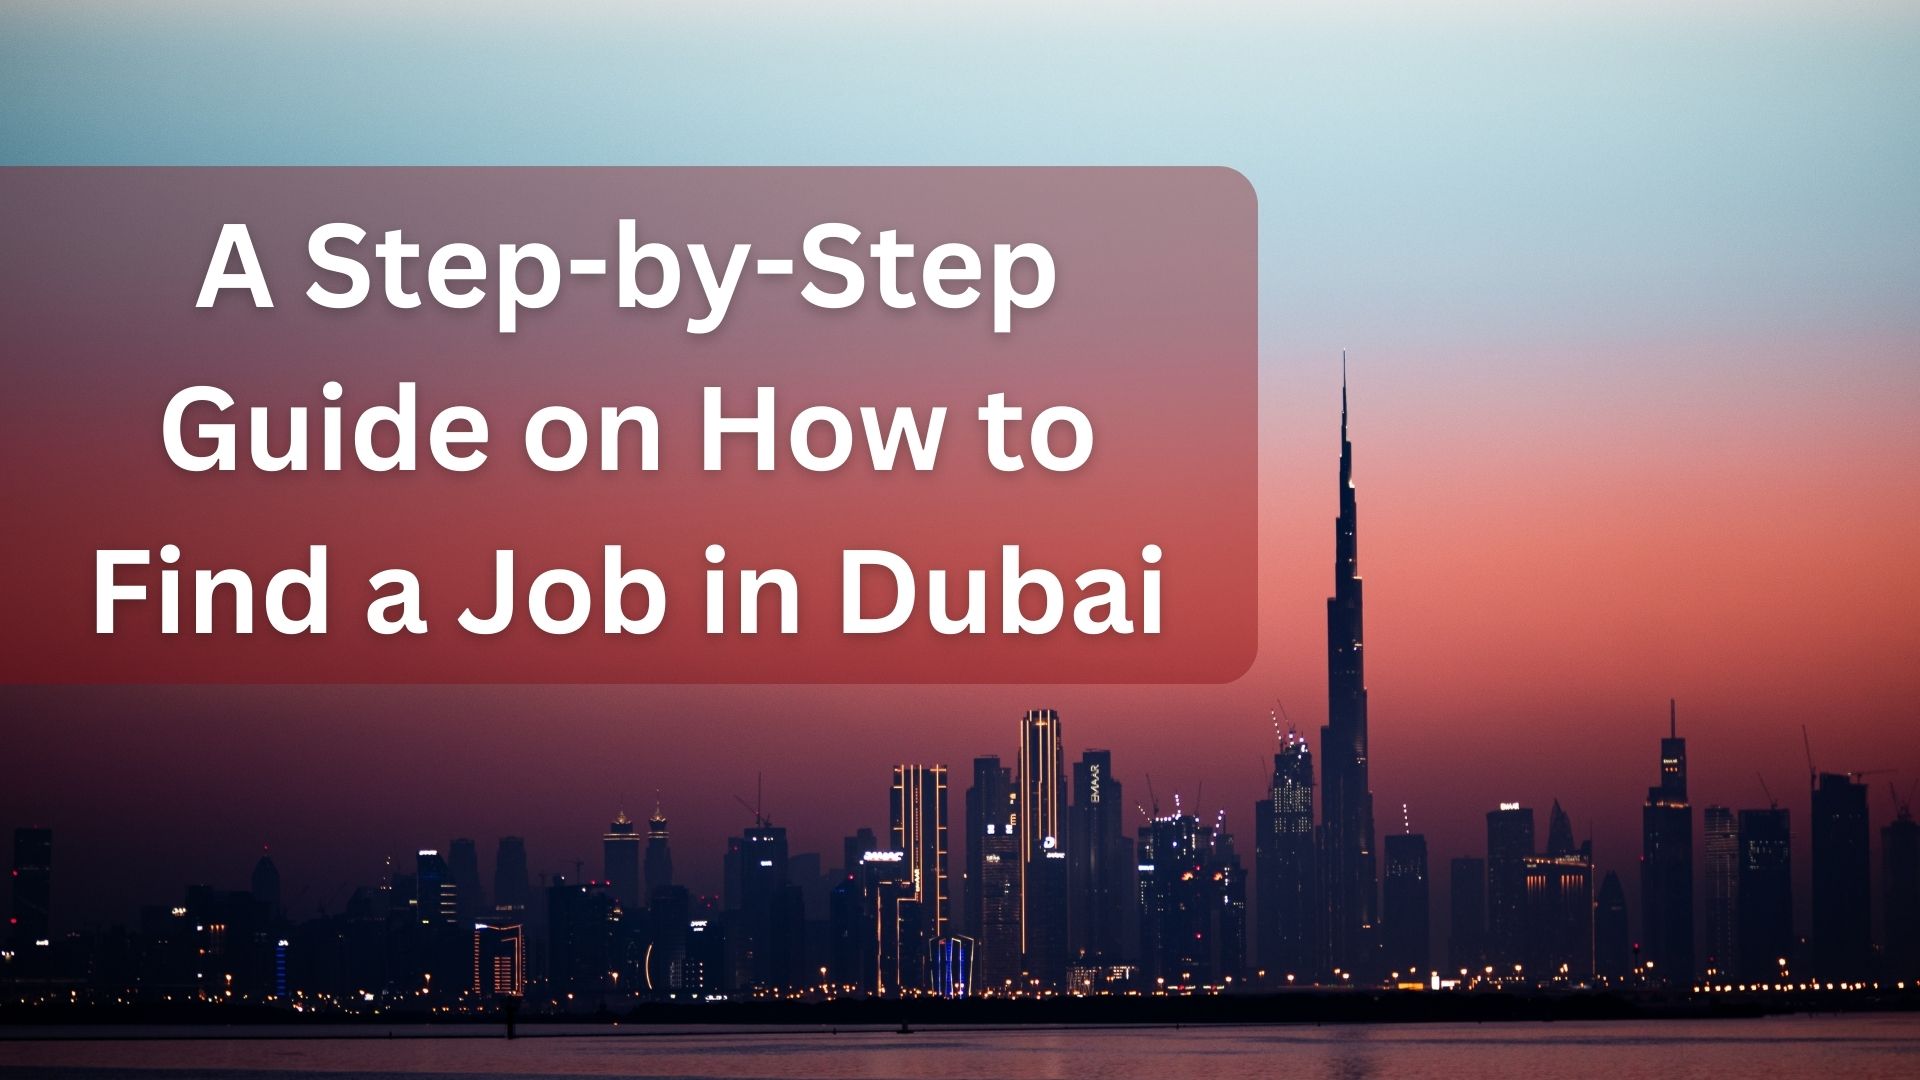 A Step-by-Step Guide on How to Find a Job in Dubai